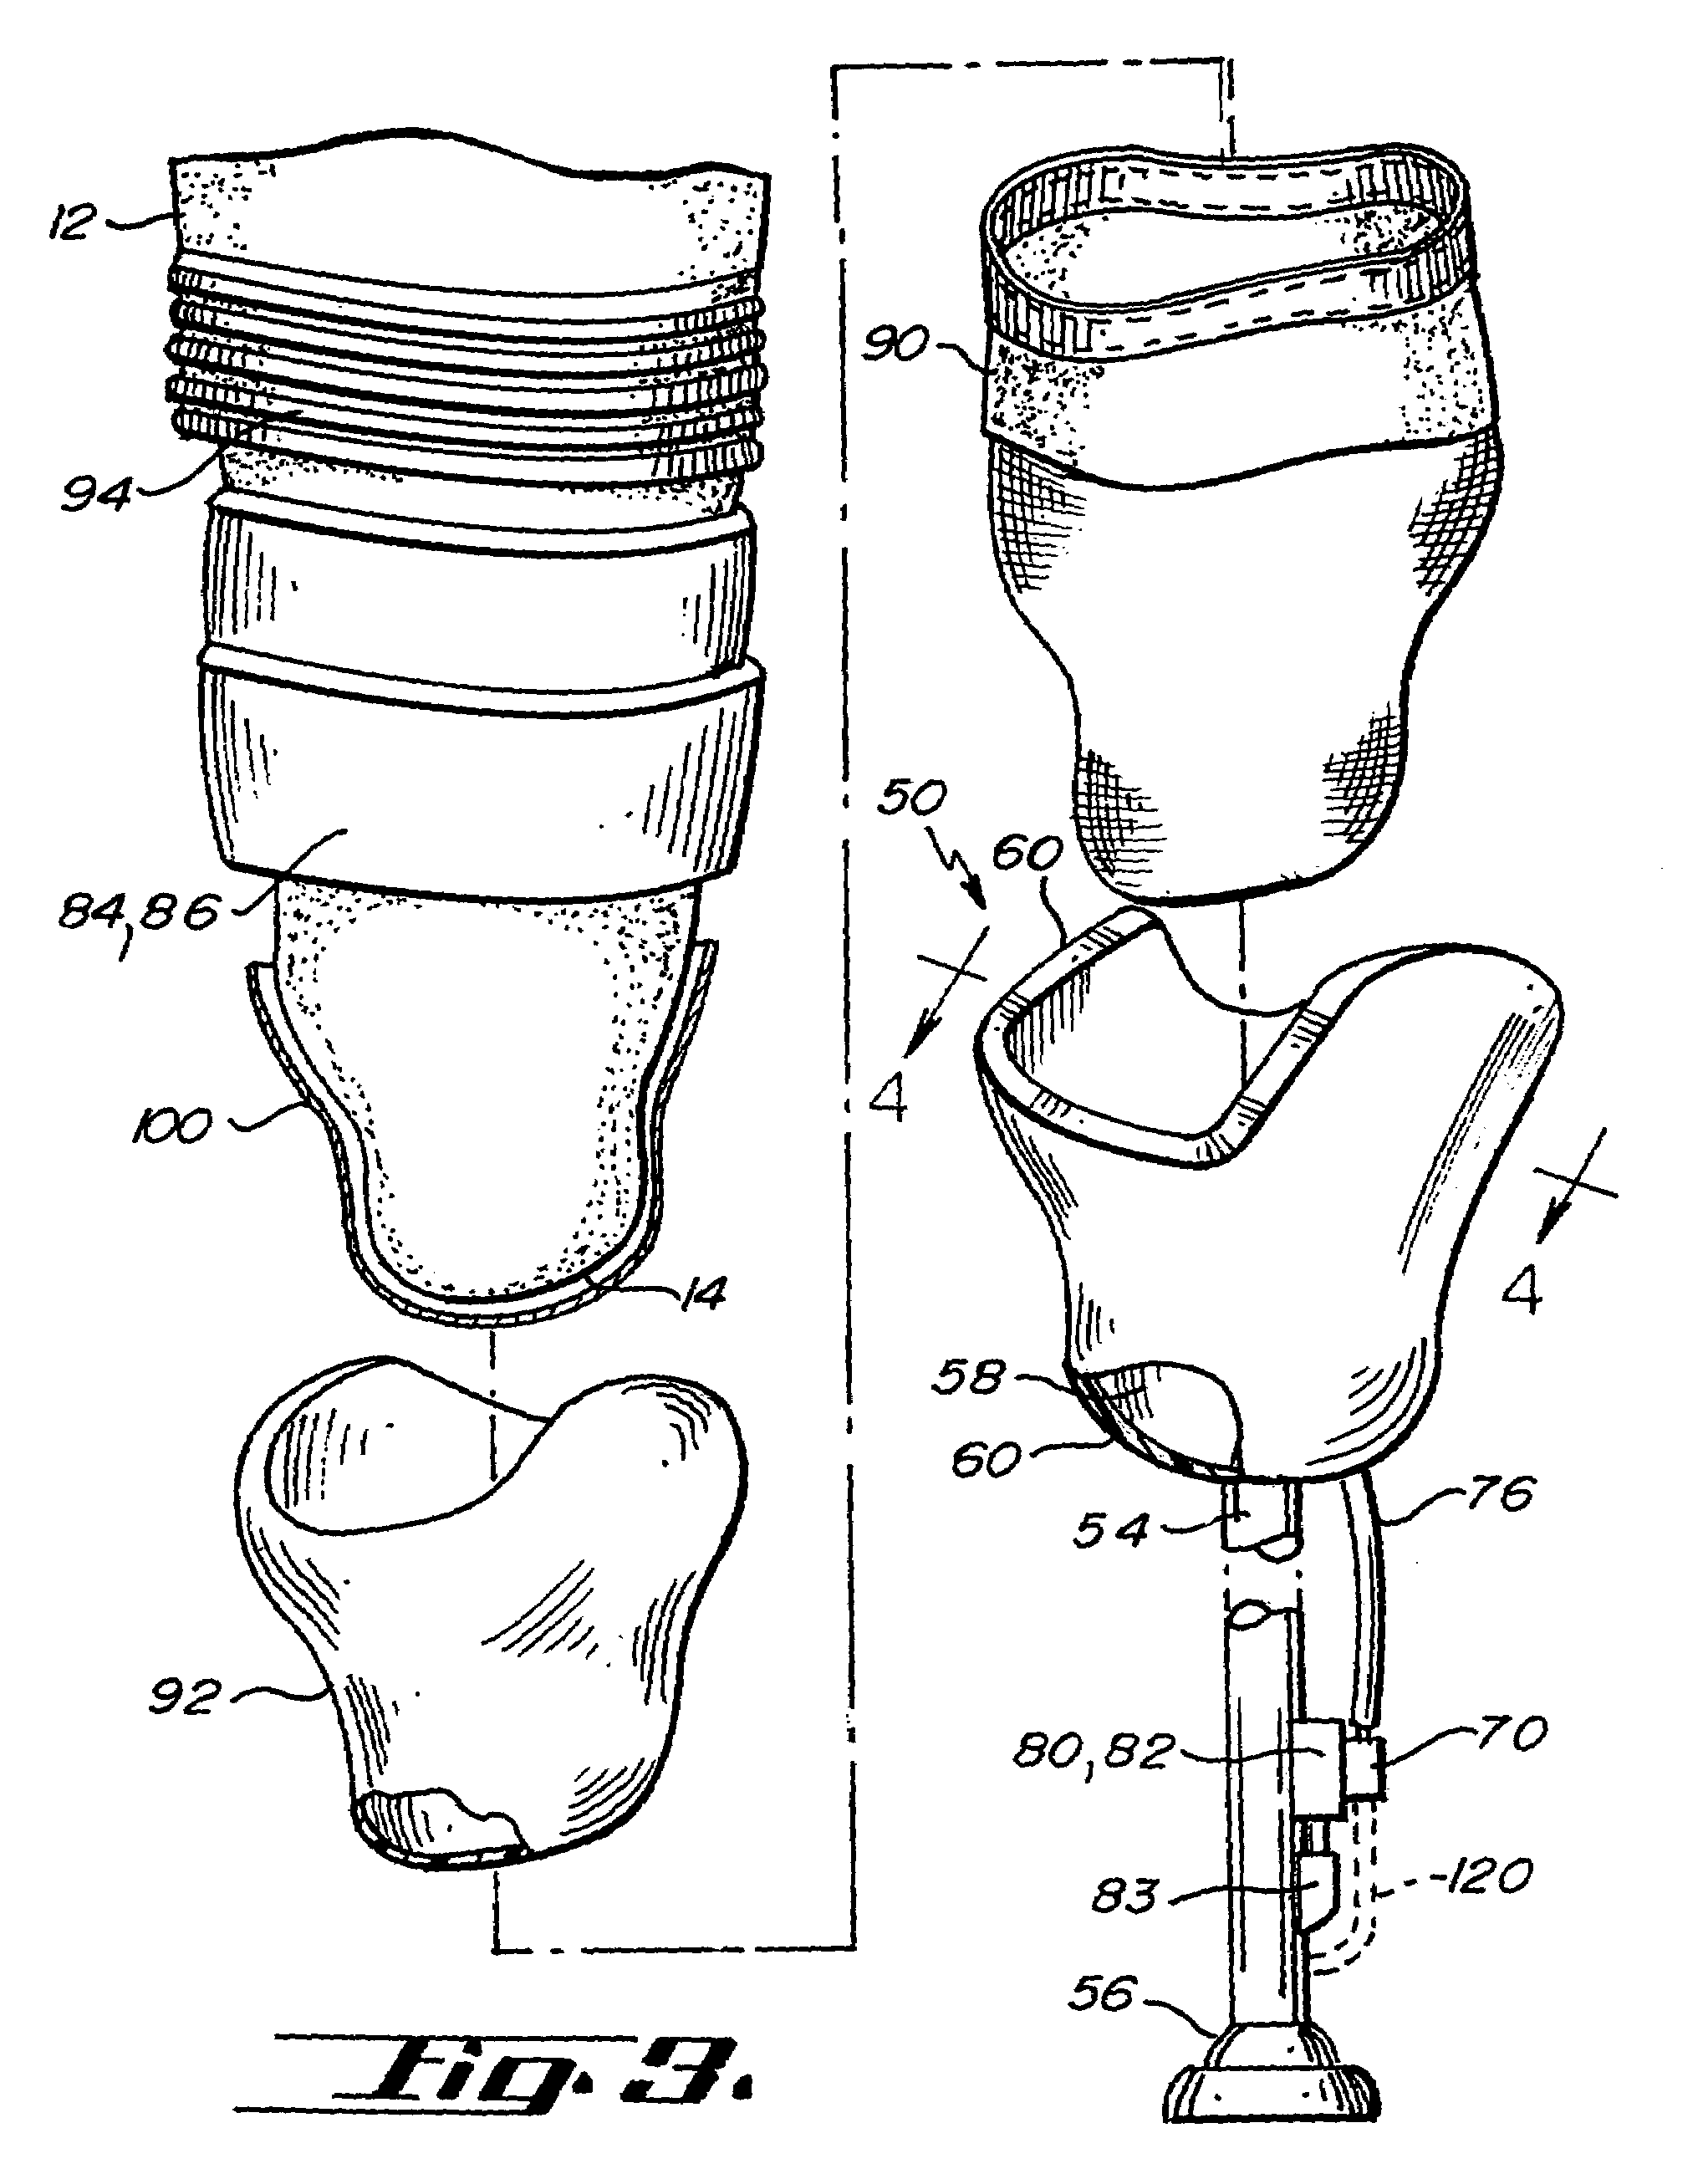 Osmotic membrane and vacuum system for artificial limb